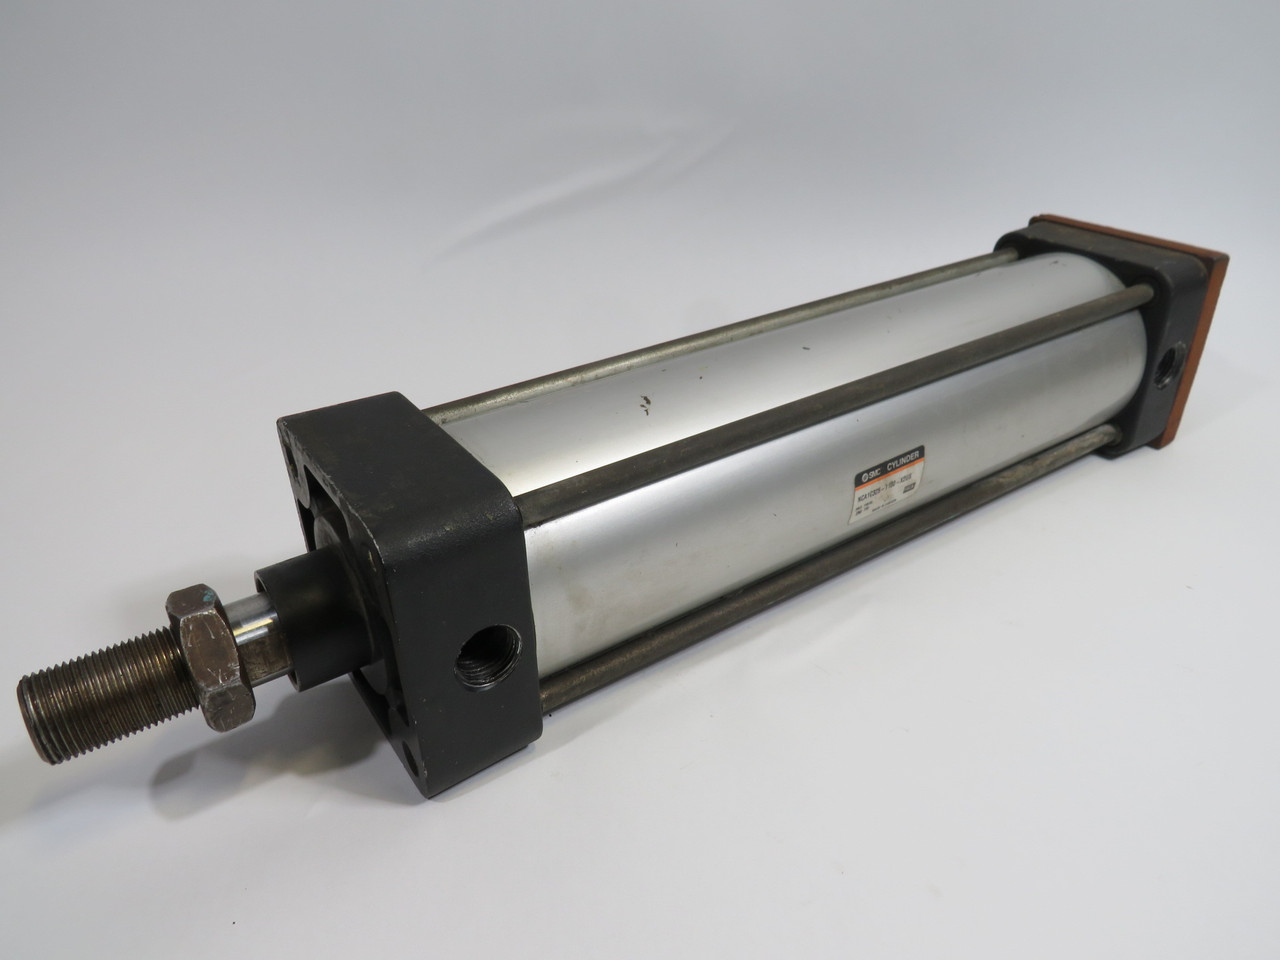 SMC NCA1C325-1100-X2US Med Duty Air Cylinder 3.25" B 11" S COSMETIC DMG USED